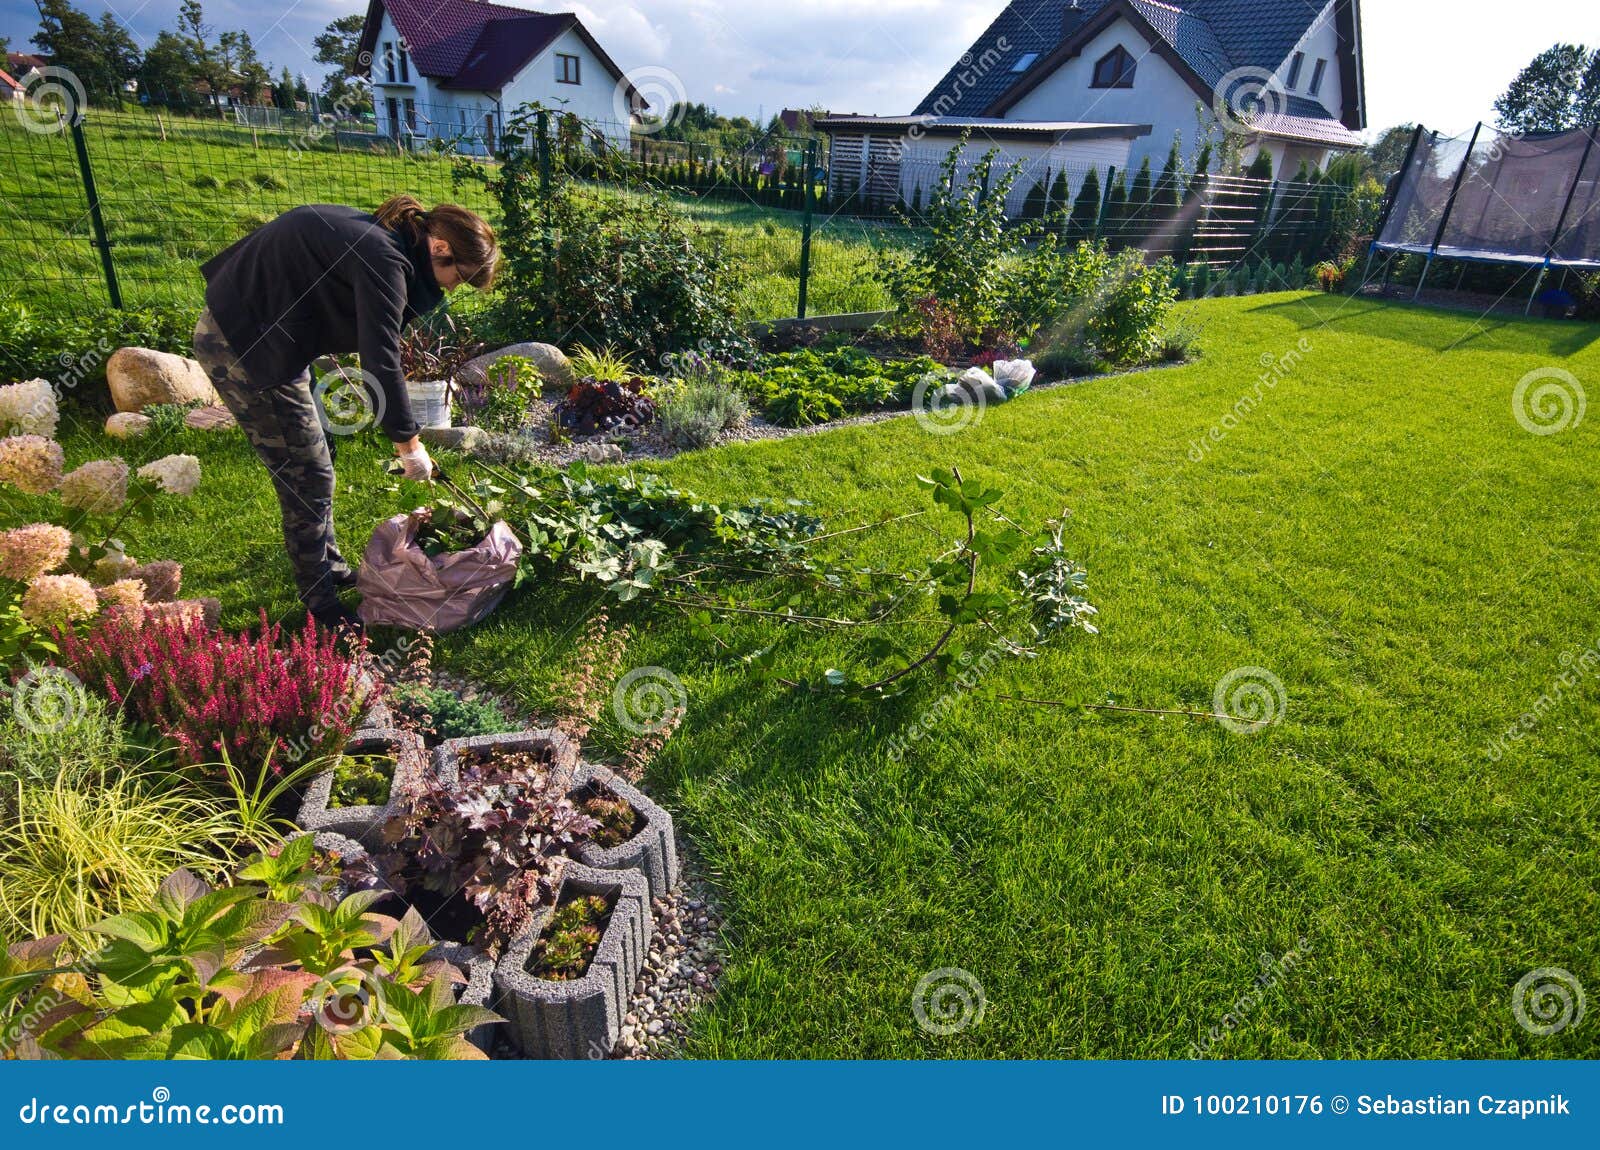 woman working in a garden, cutting excess twigs of plants